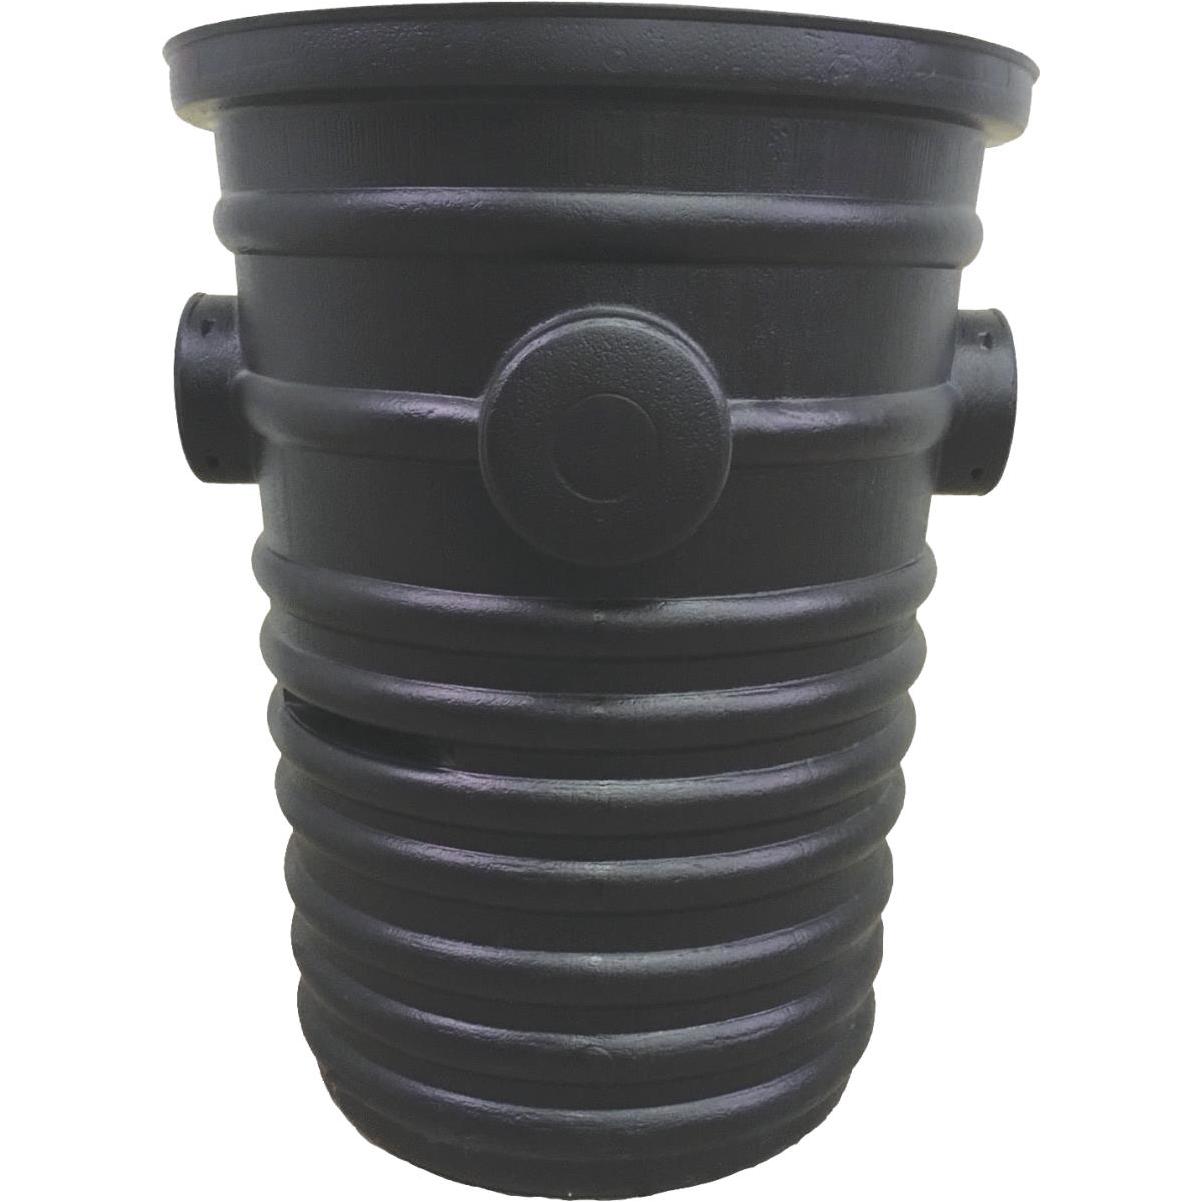 Dia Advanced Basement 24 In H x 19 In Polyethylene Sump Pump Well Liner